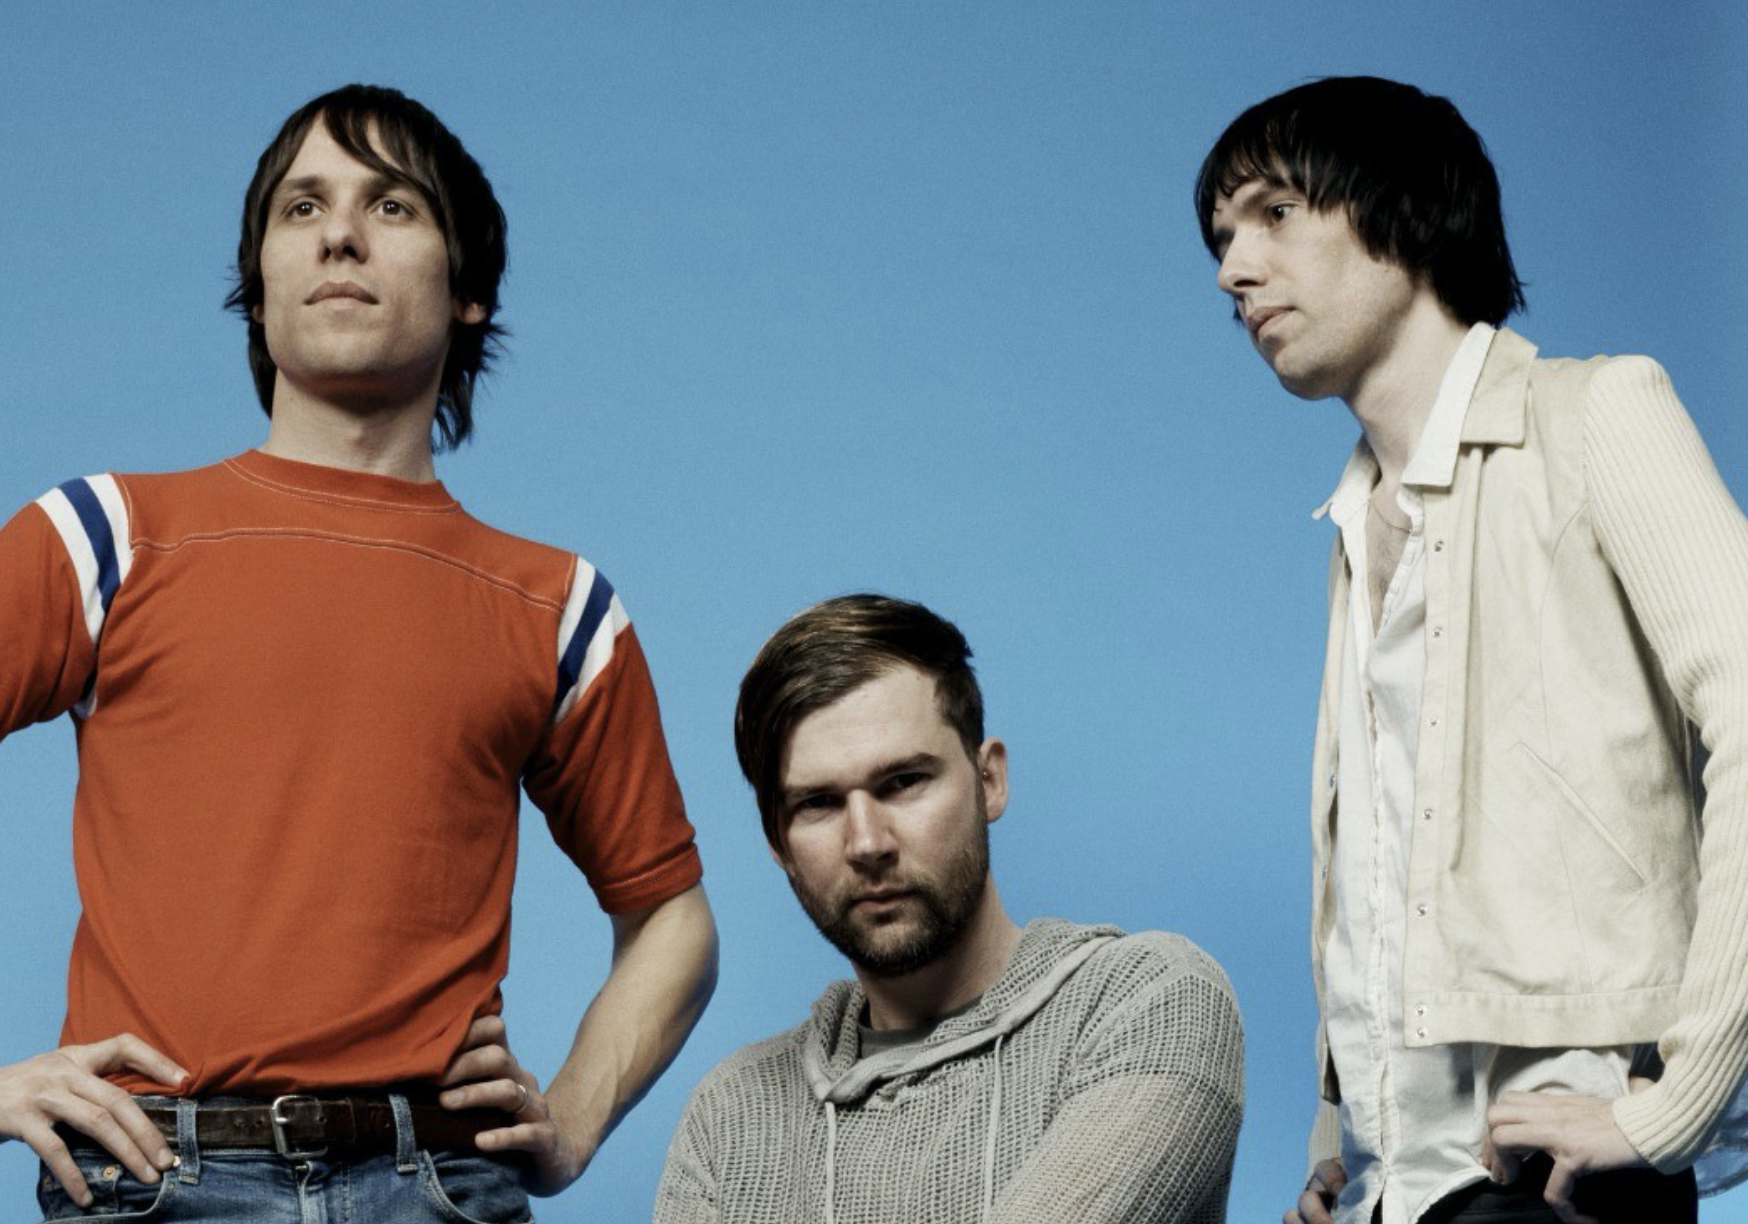 Indie rock heroes The Cribs announce 2021 show at The Piece Hall